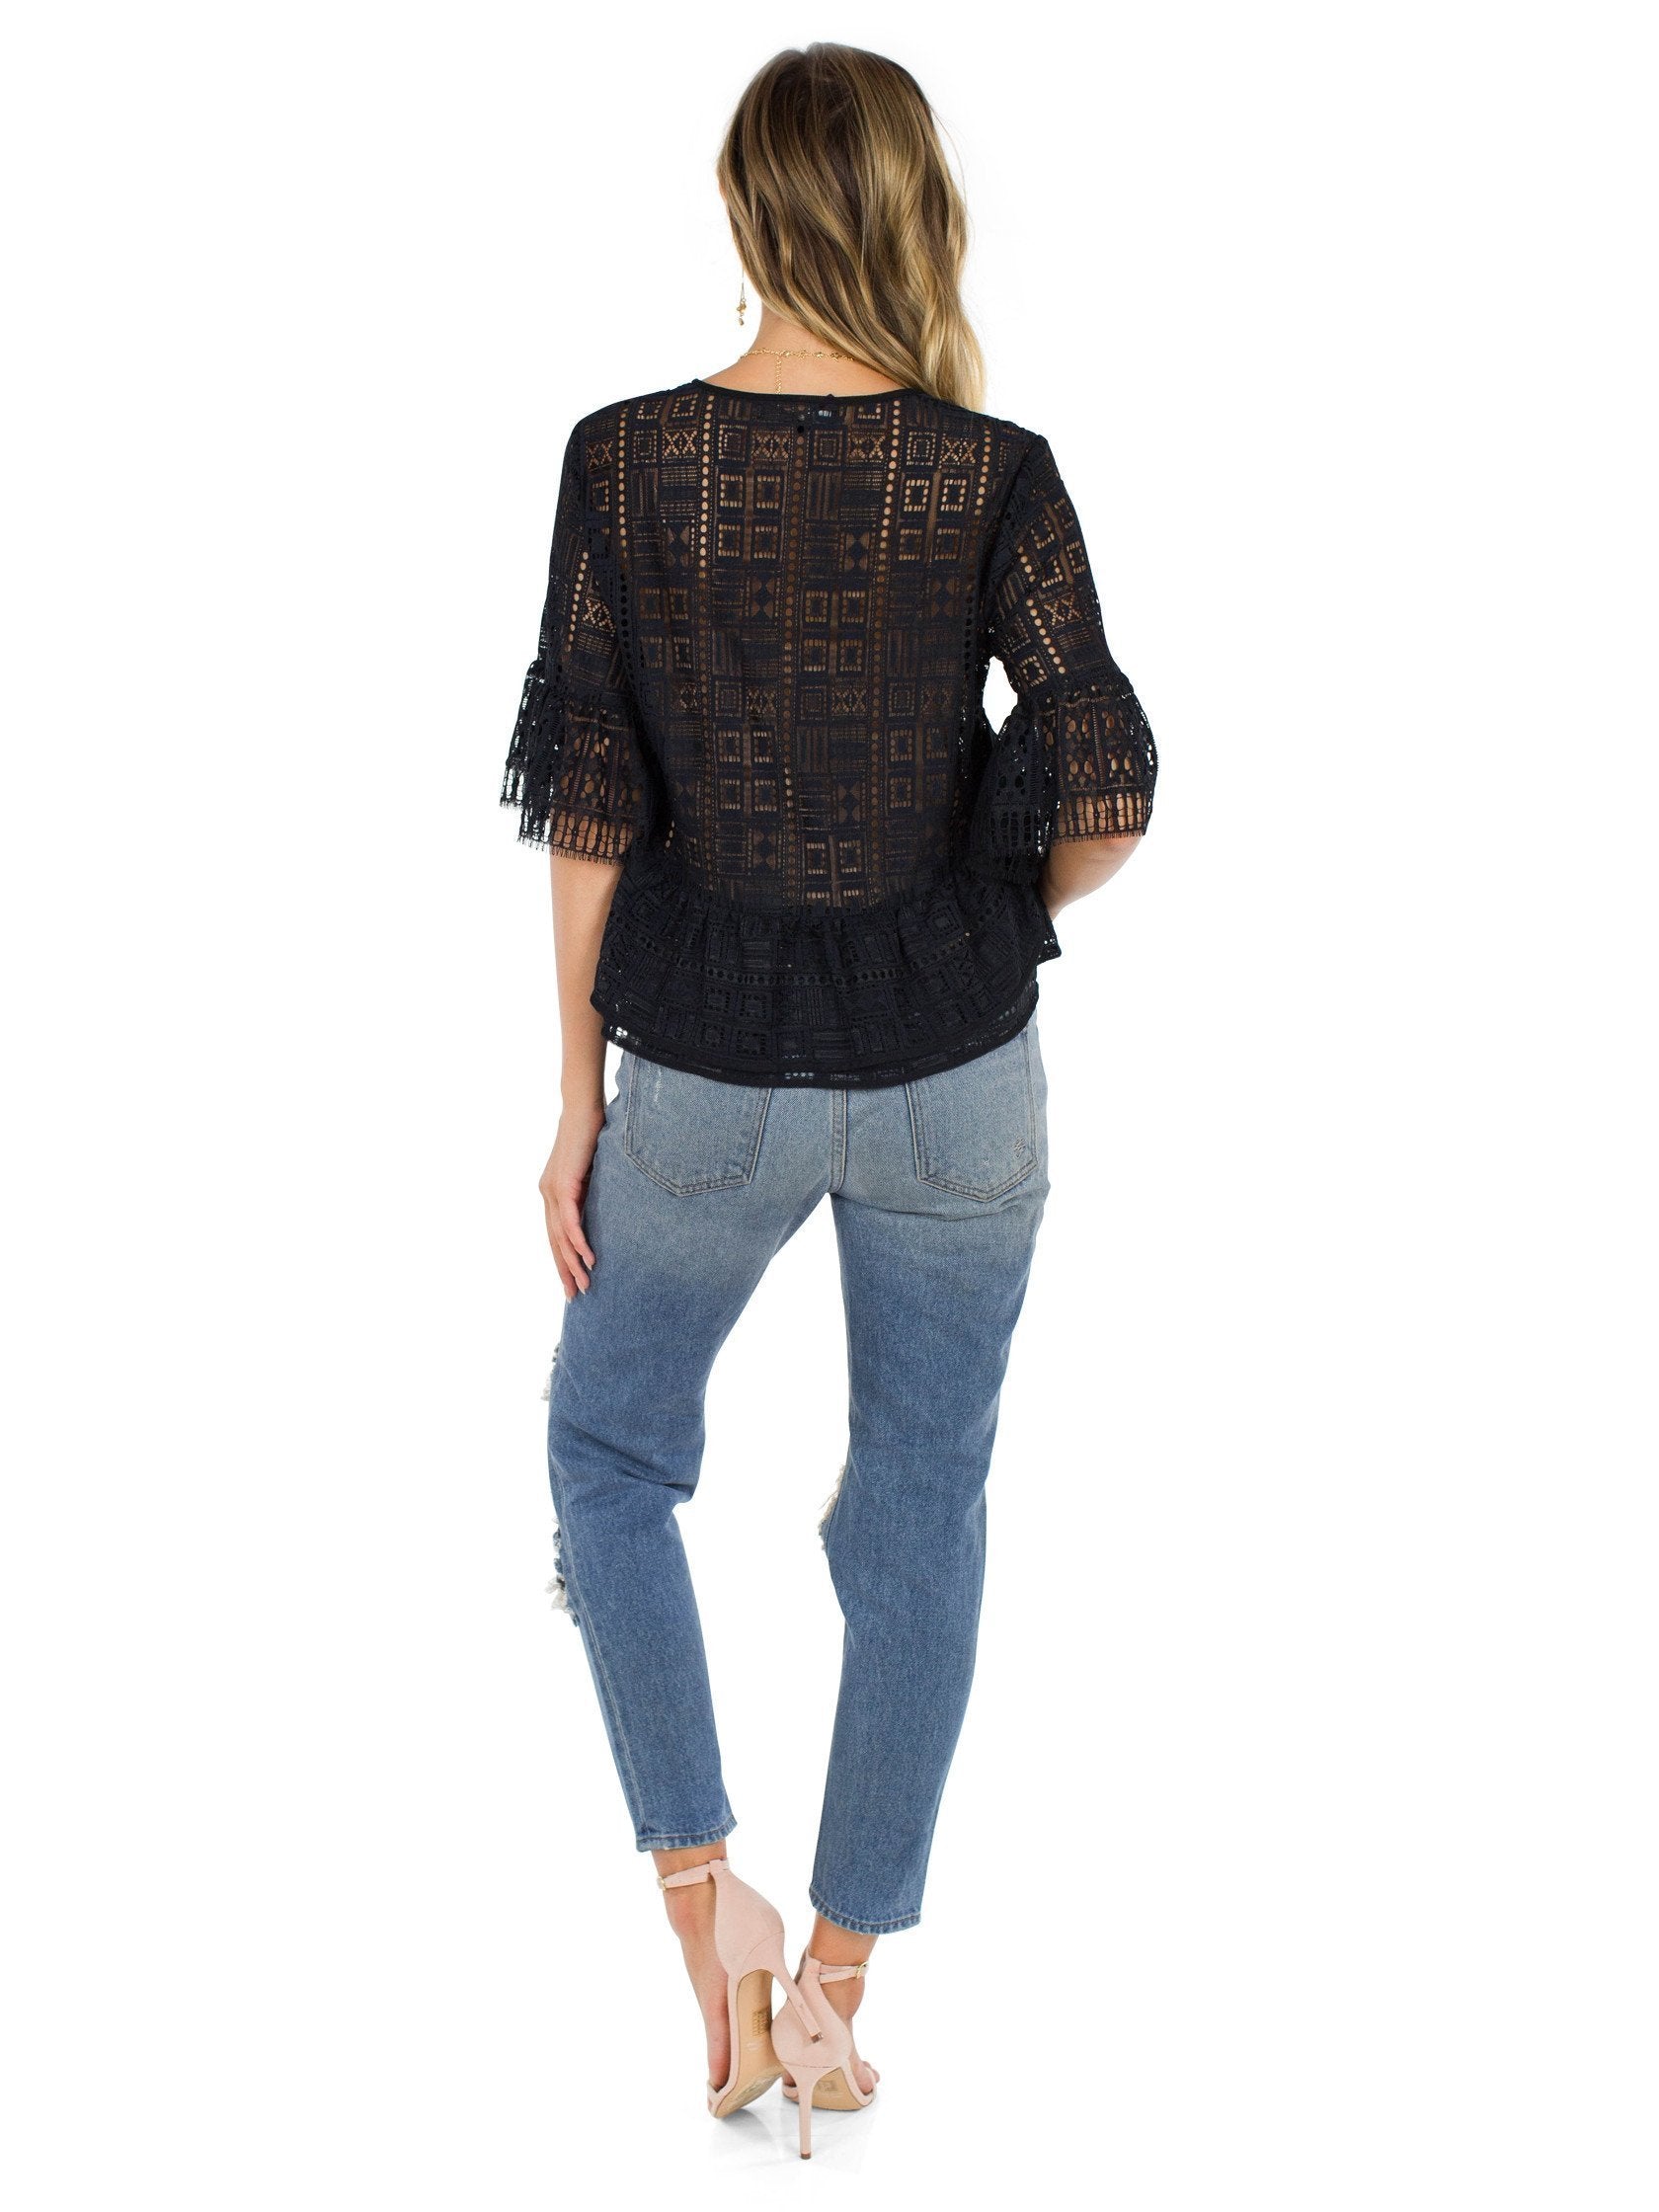 Women outfit in a top rental from BCBGMAXAZRIA called Immane Ruffled Lace Top